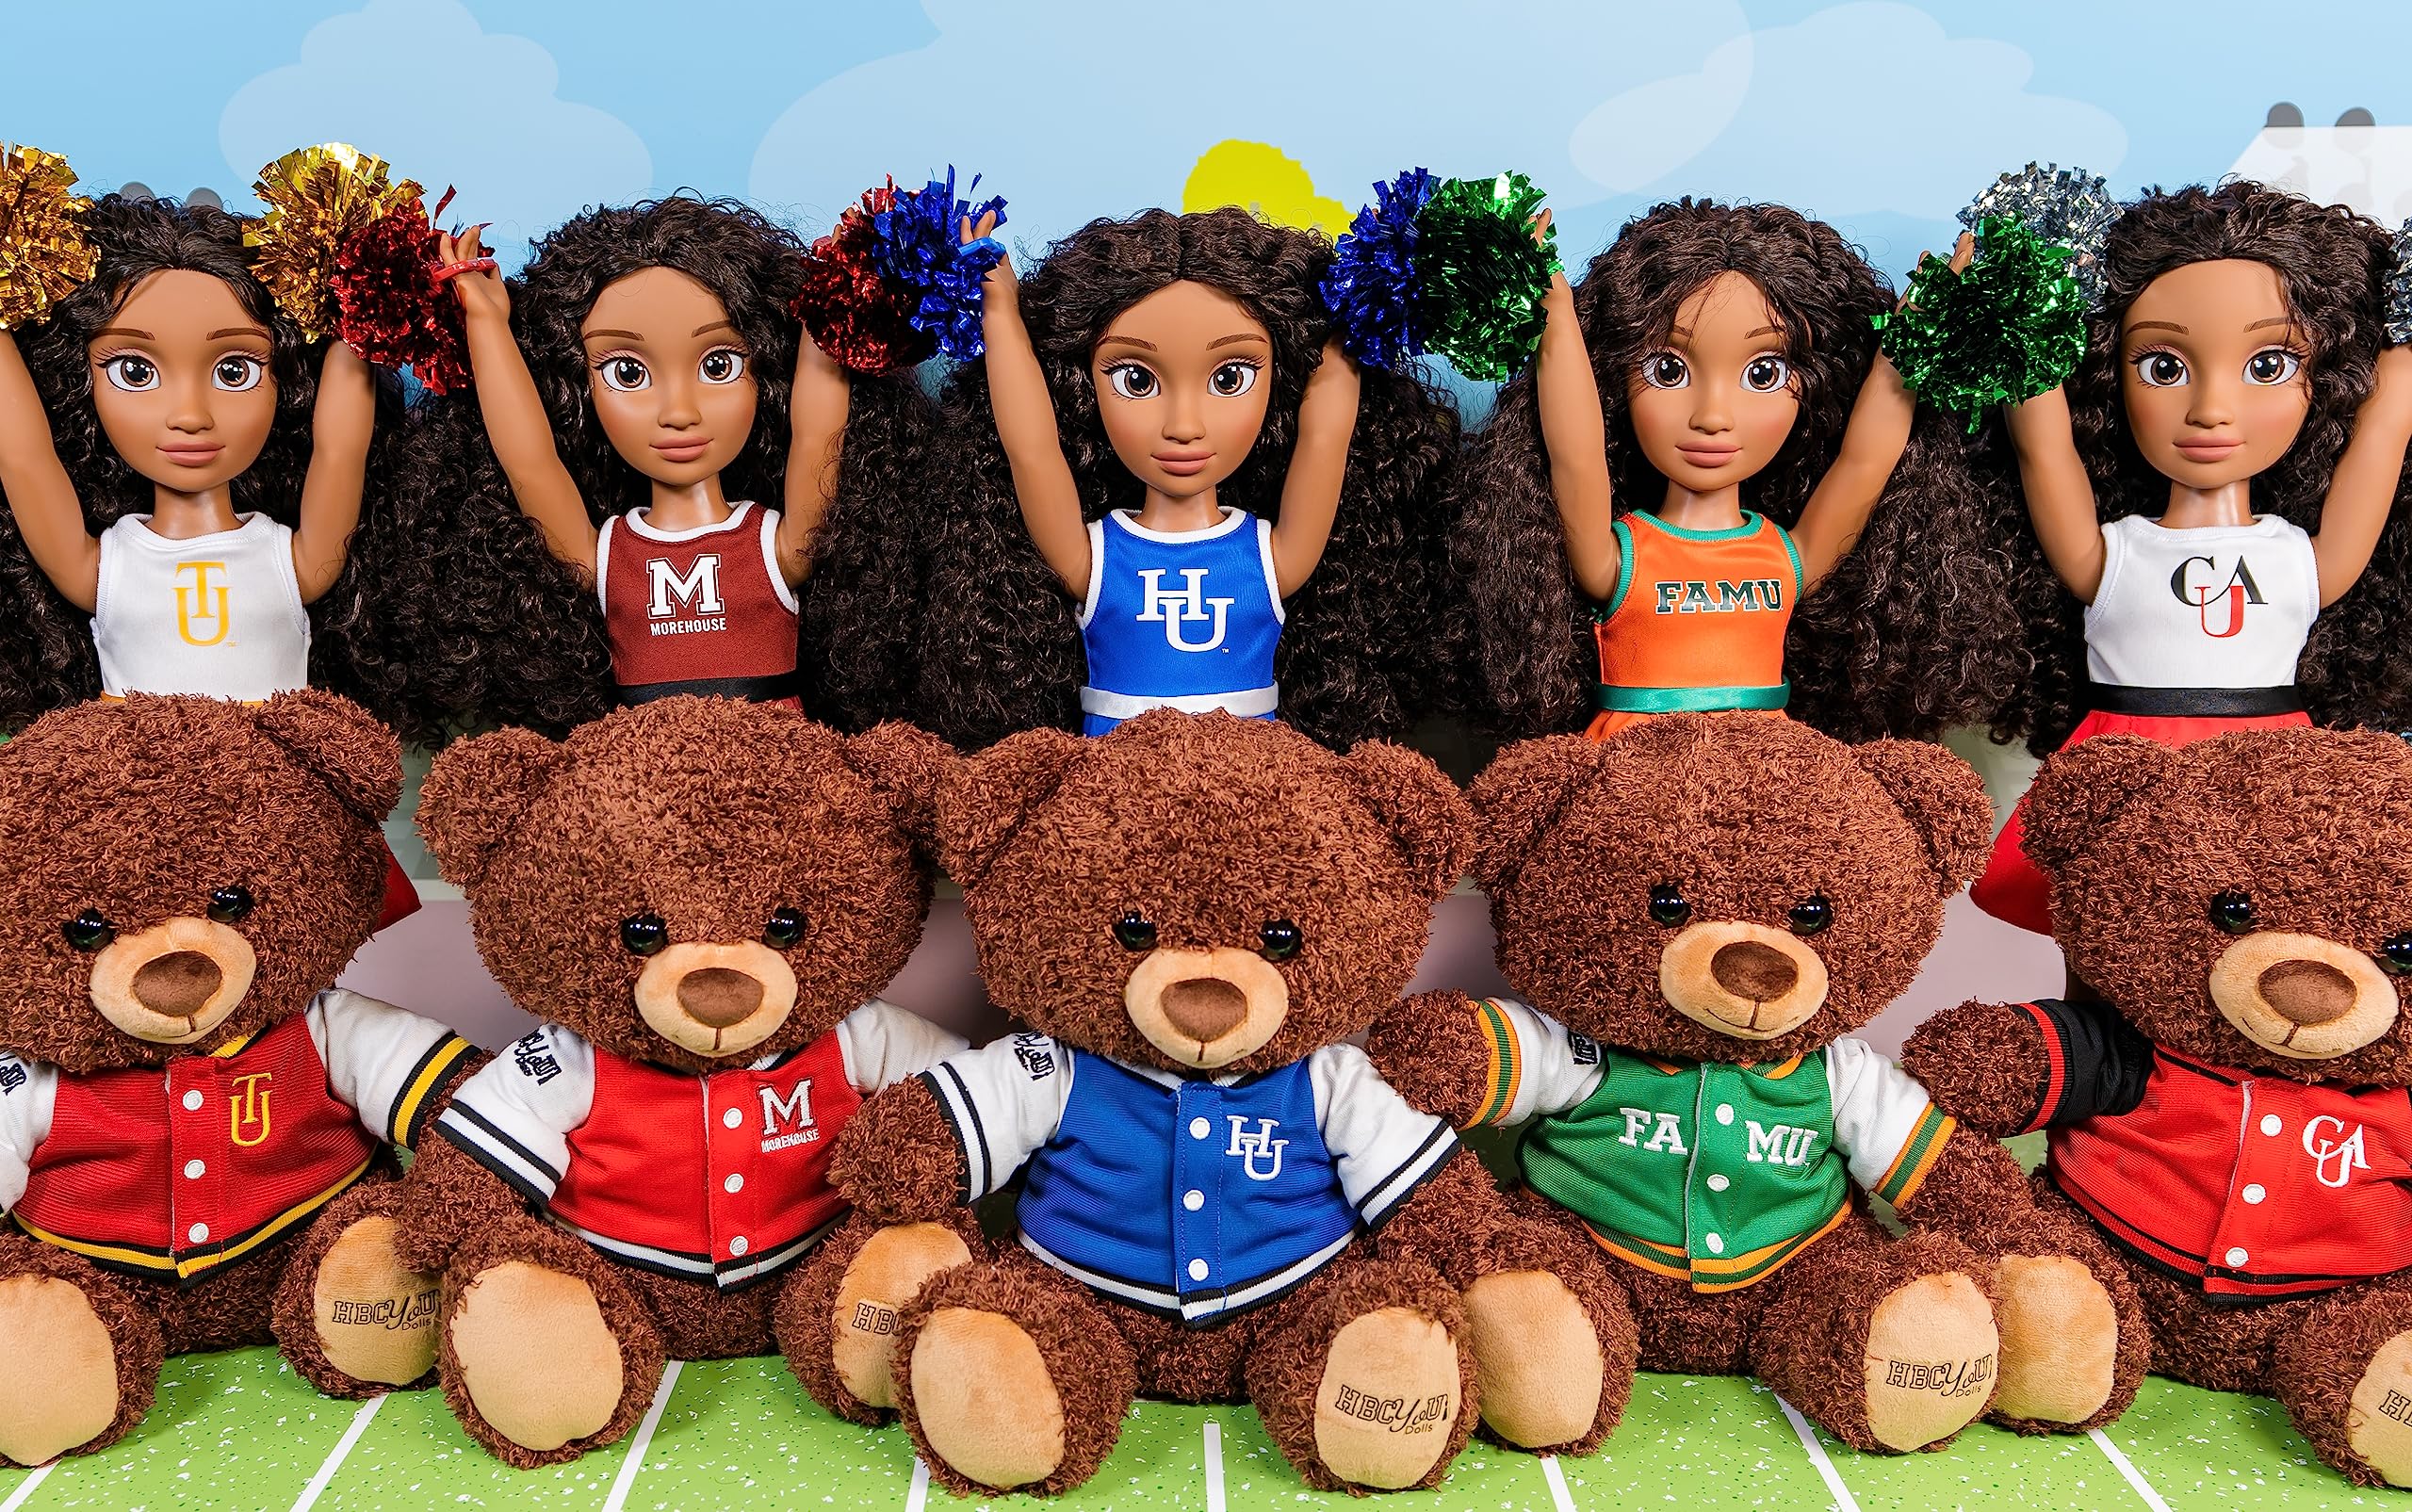 Purpose Toys HBCyoU FAMU Cheer Captain Alyssa 18-inch Doll & Accessories, Curly Hair, Medium Brown Skin Tone, Designed and Developed